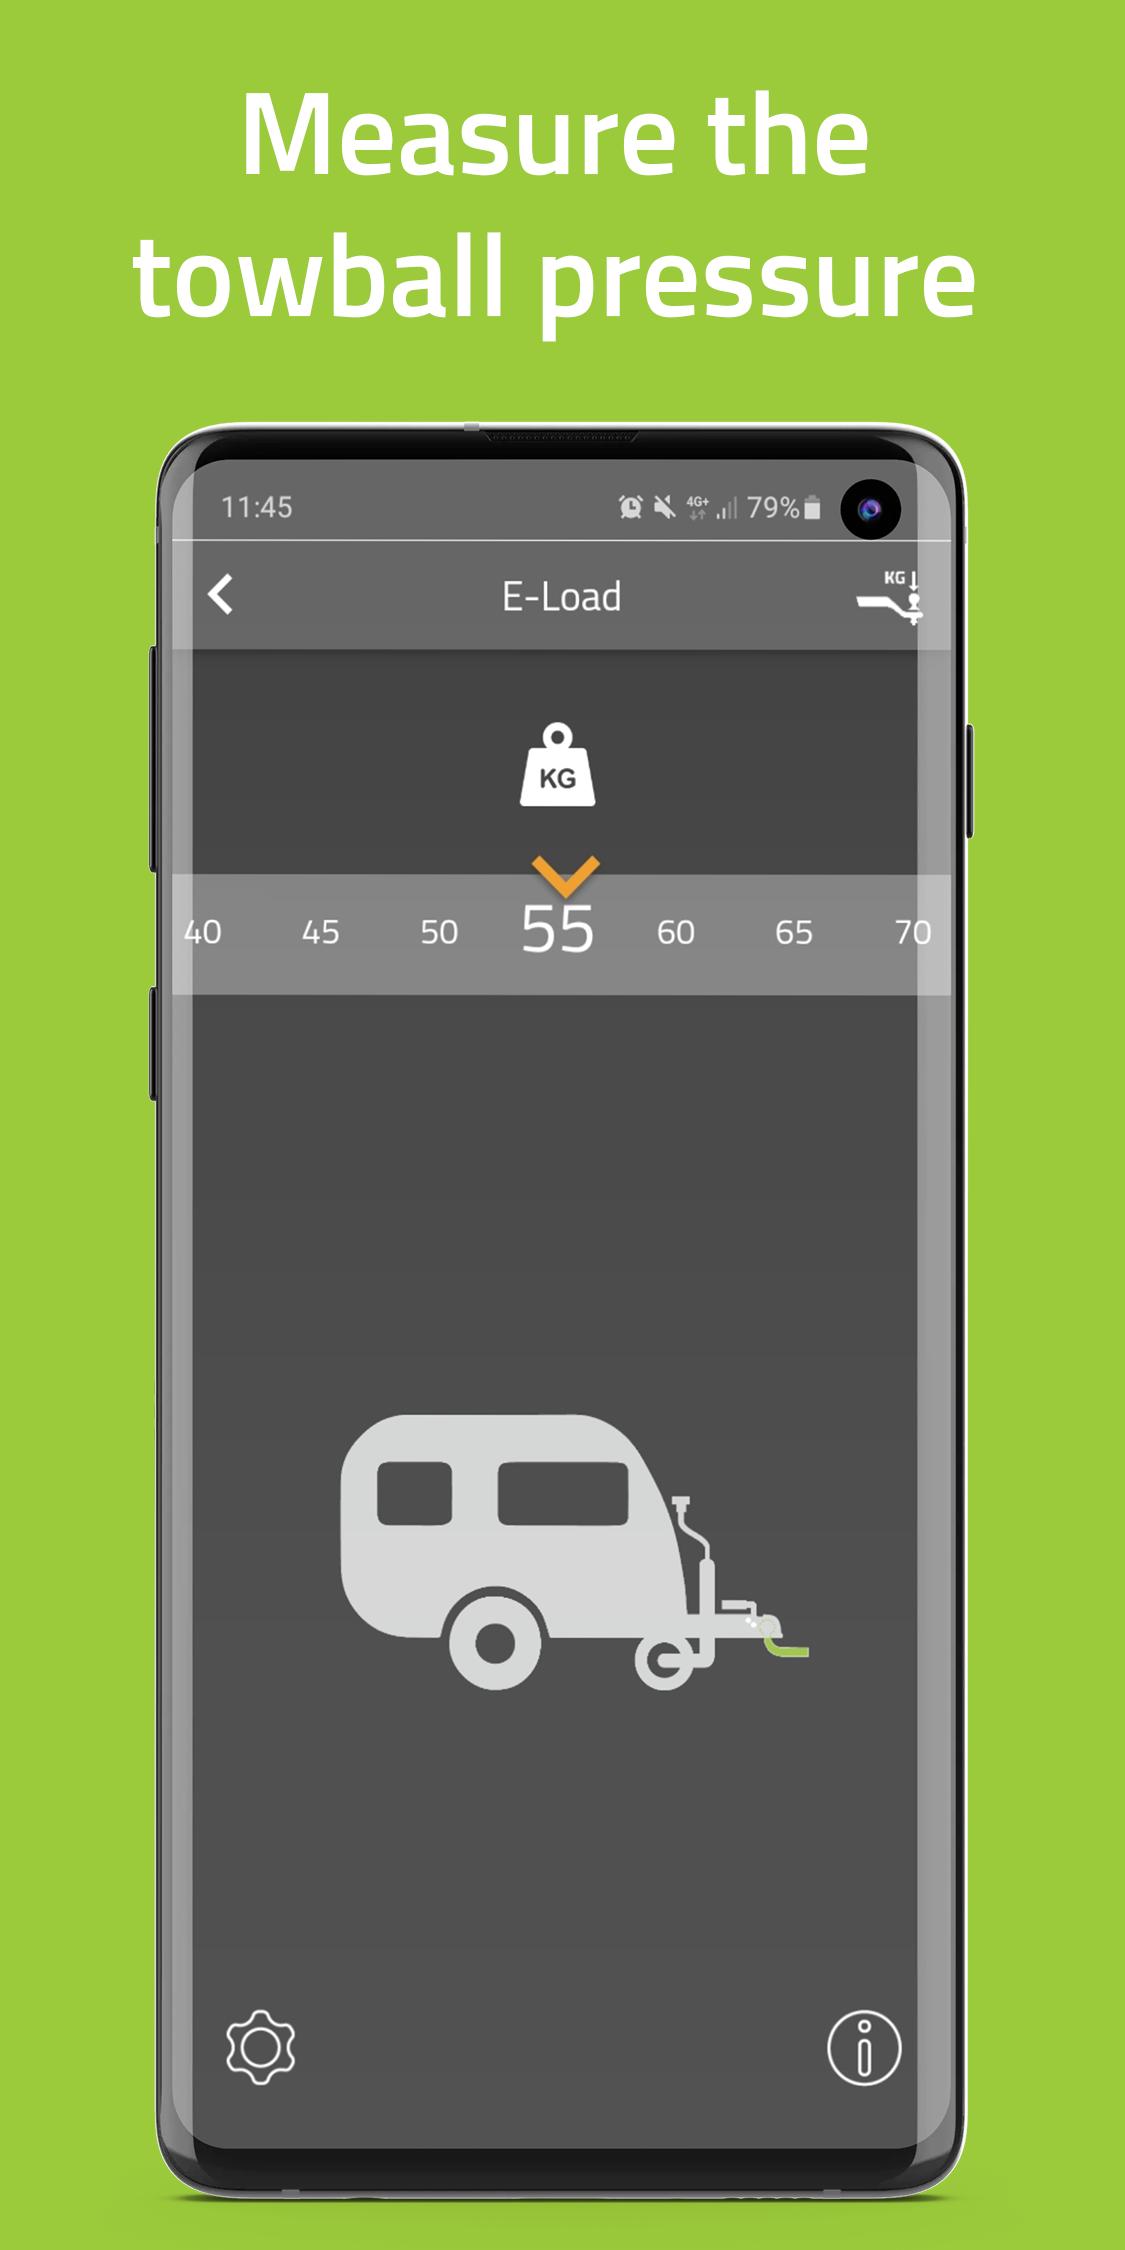 E-Trailer Safety while driving 1.6.123 Screenshot 8